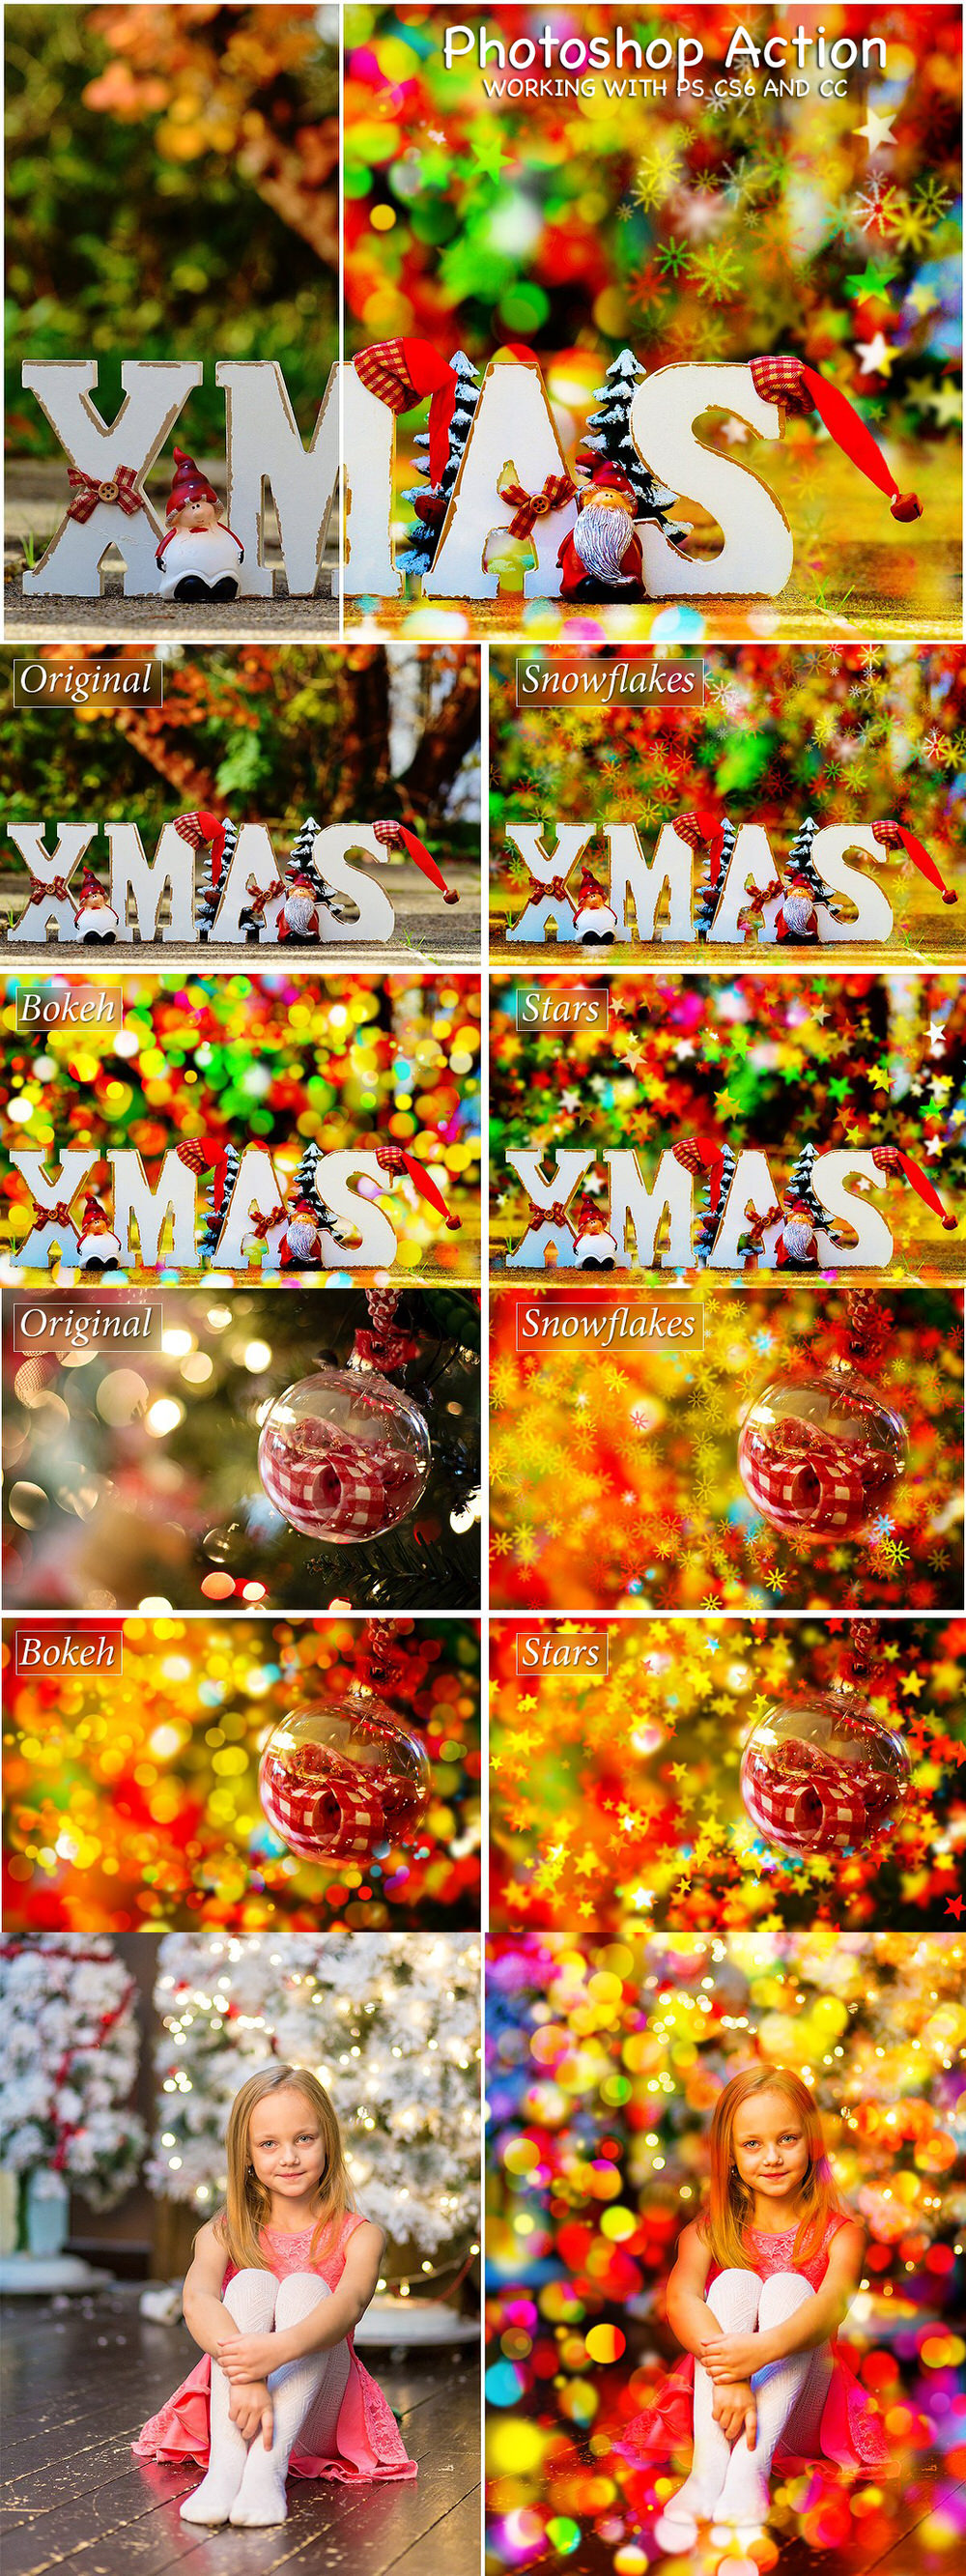 Download A New Christmas Deal With 400+ Holiday Overlays - Premium Downloads Lorelei Web Design